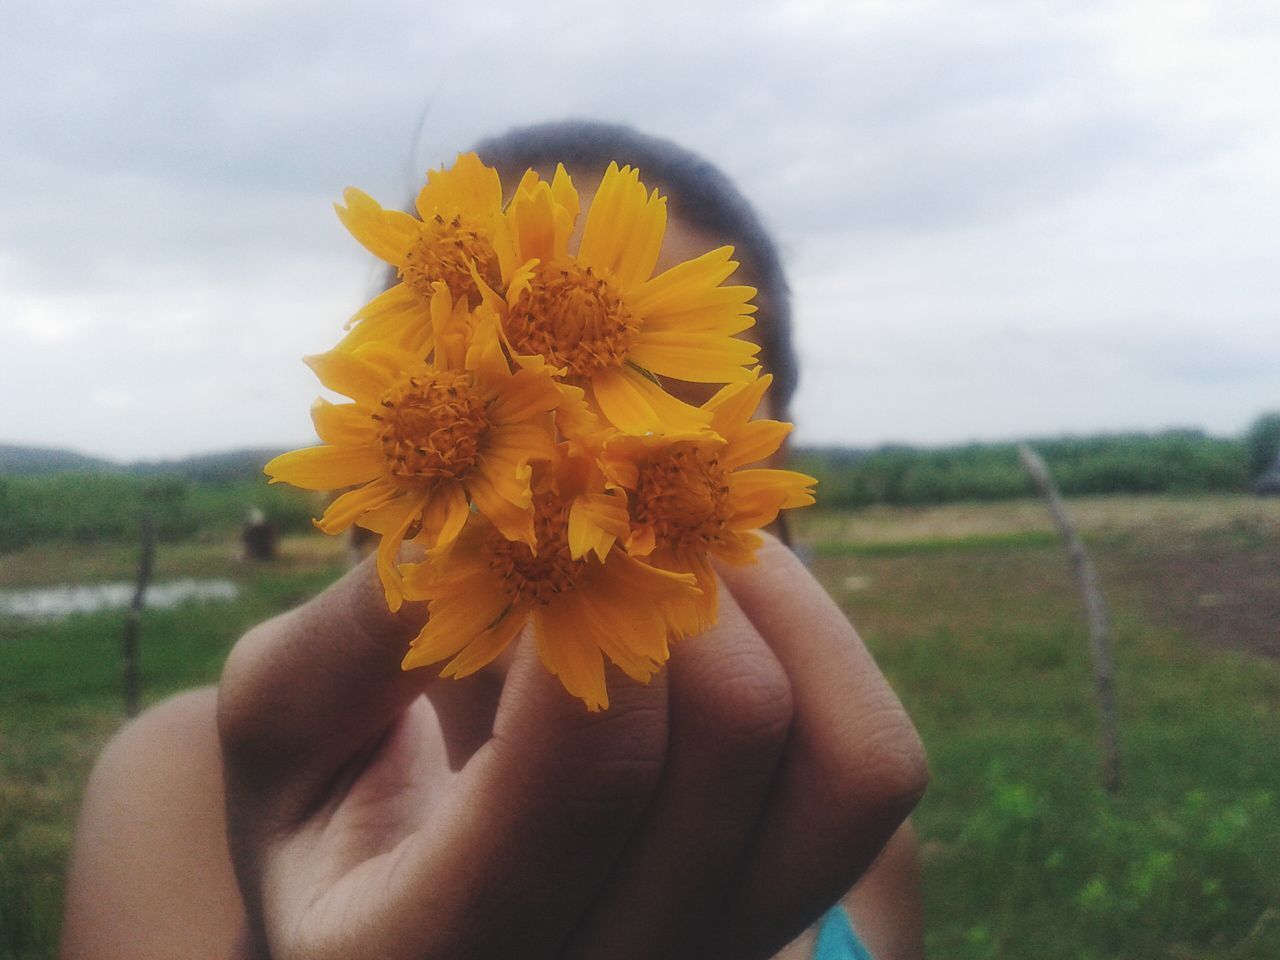 flower, person, holding, yellow, fragility, focus on foreground, freshness, part of, petal, flower head, cropped, unrecognizable person, beauty in nature, human finger, personal perspective, lifestyles, close-up